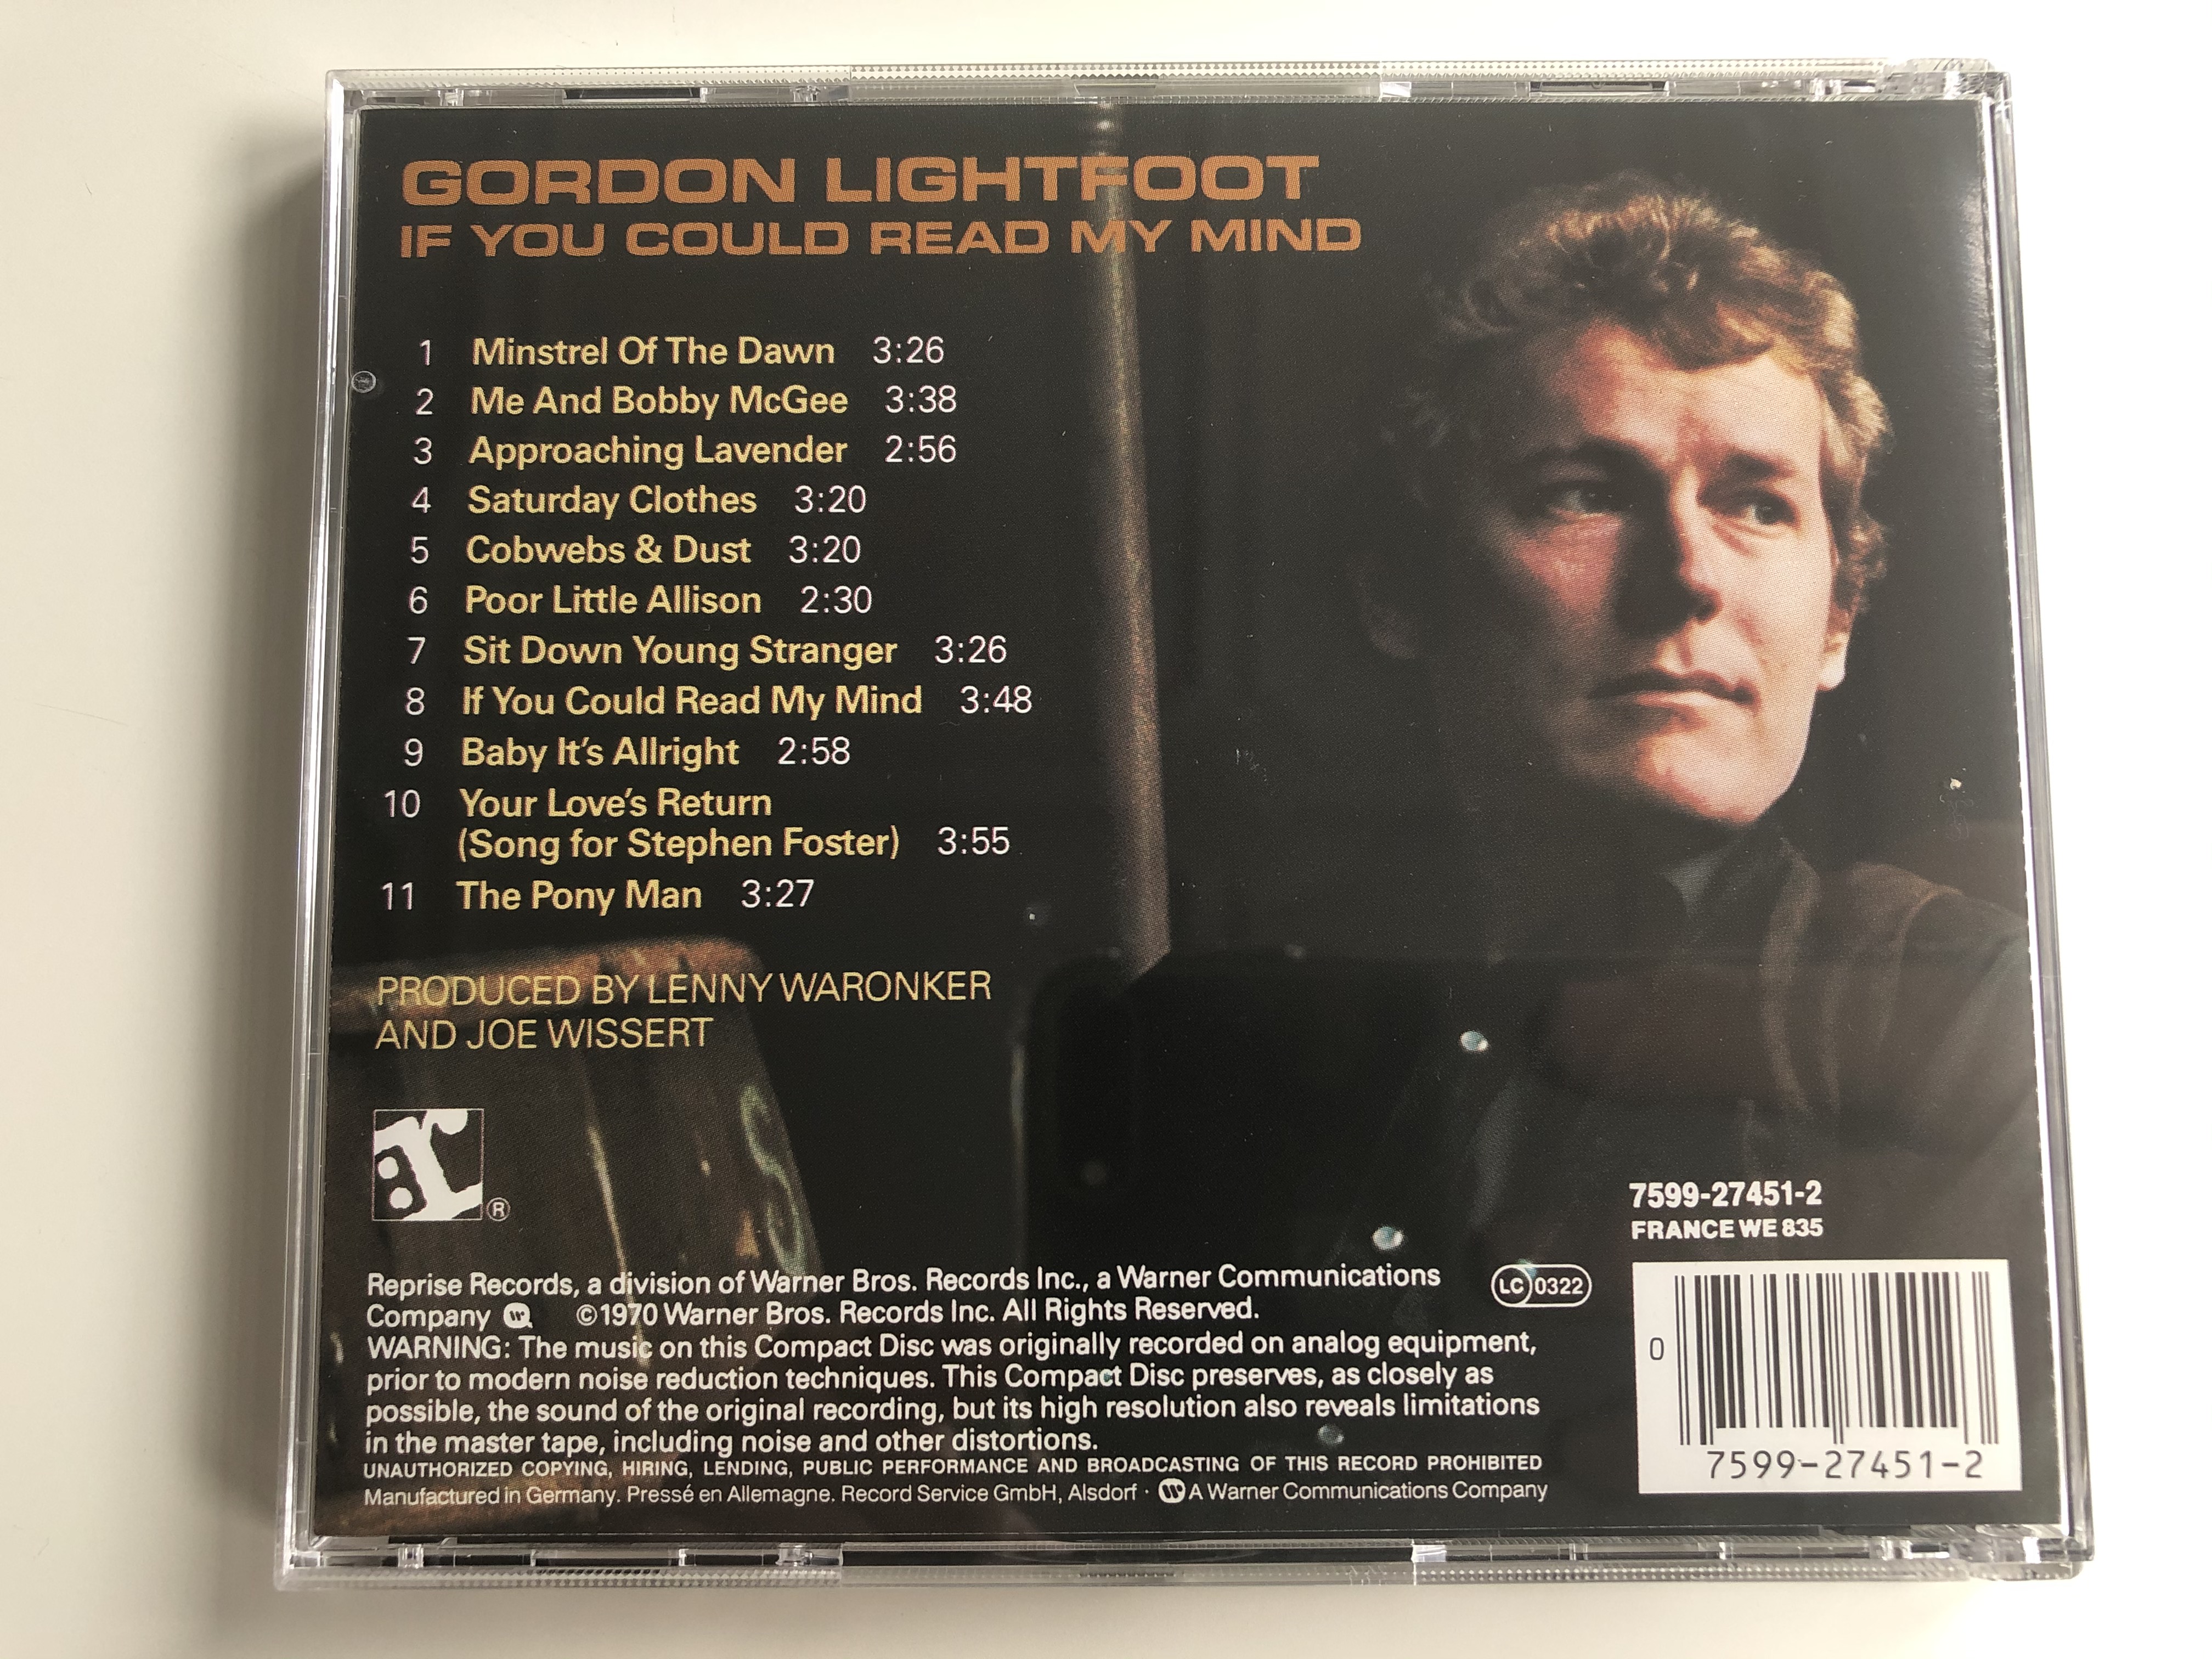 gordon-lightfoot-if-you-could-read-my-mind-reprise-records-audio-cd-7599-27451-2-5-.jpg